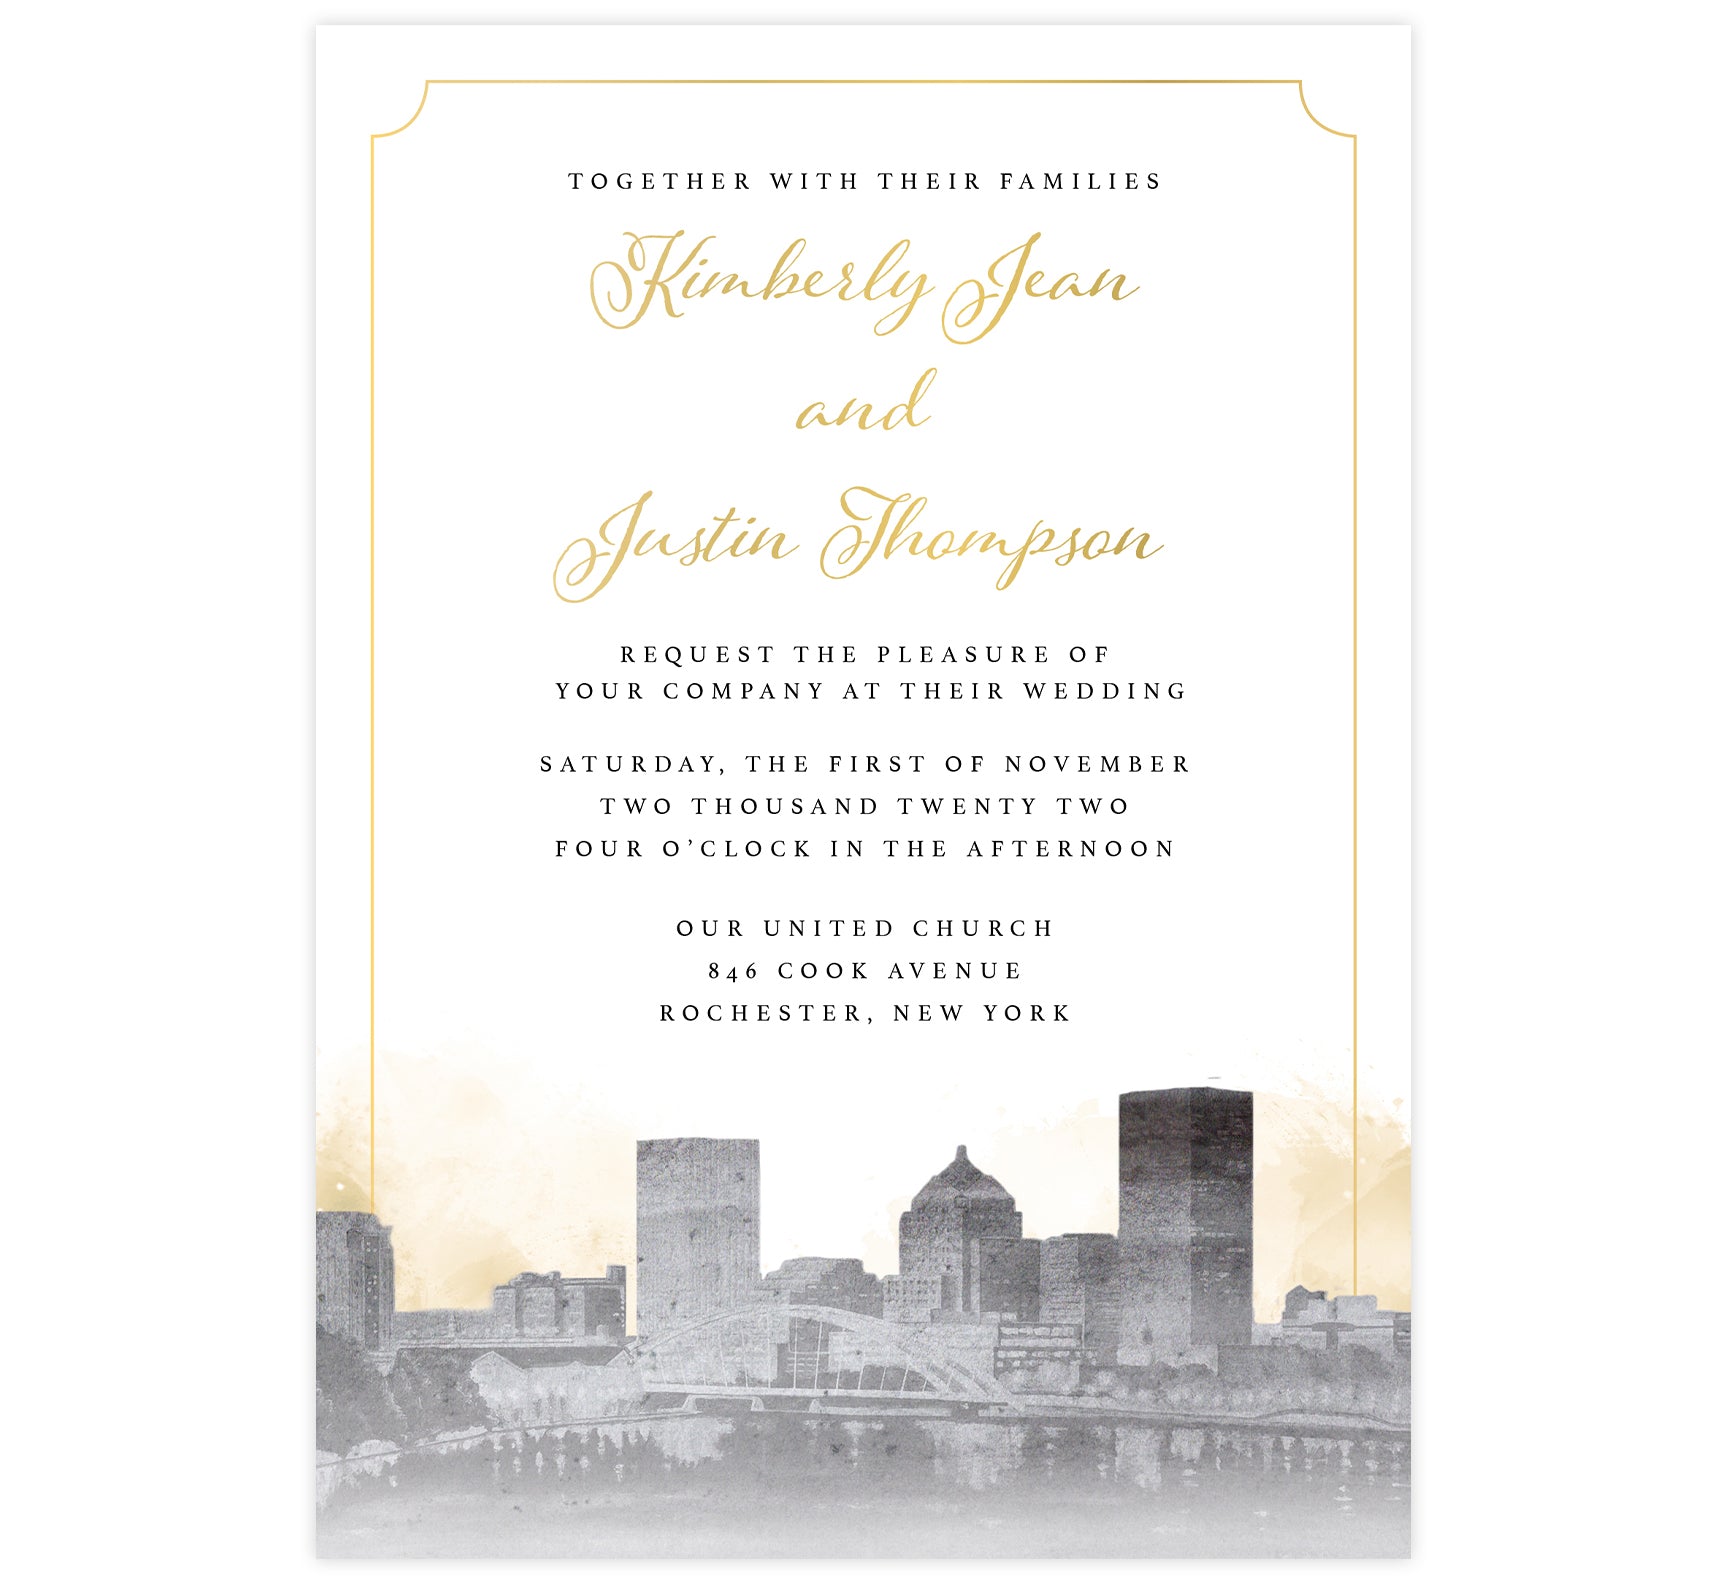 Elegant Skyline wedding invitation; artistic version of the Rochester, NY skyline in grayscale with gold watercolor background and gold elegant frame around the card.